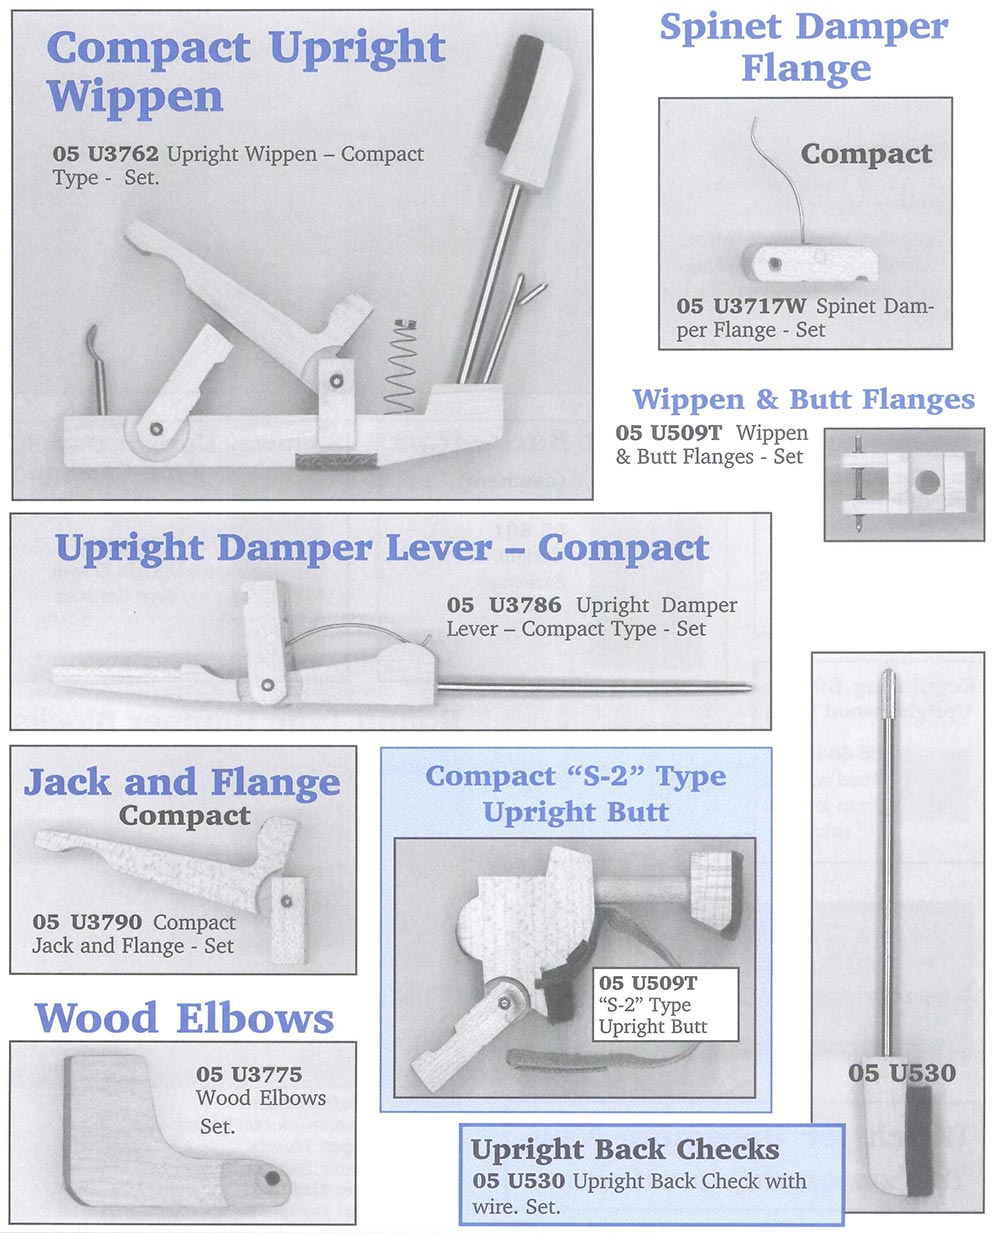 Compact Upright Wippen